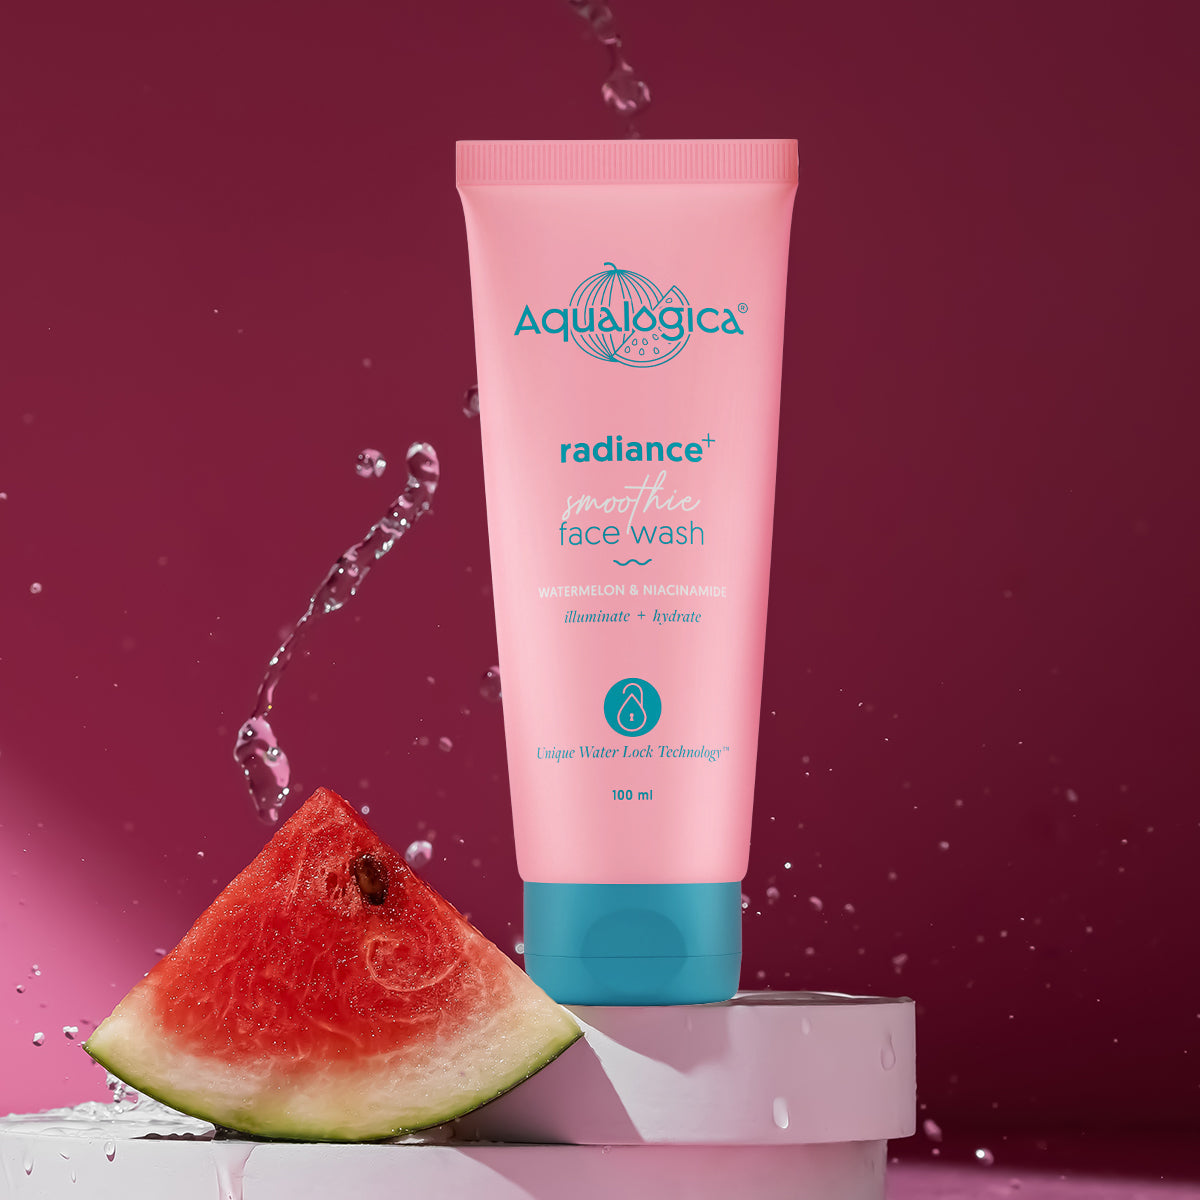 FREEBIE Radiance+ Smoothie Face Wash with Watermelon & Niacinamide for Clear & Oil-Free Skin - 100ml